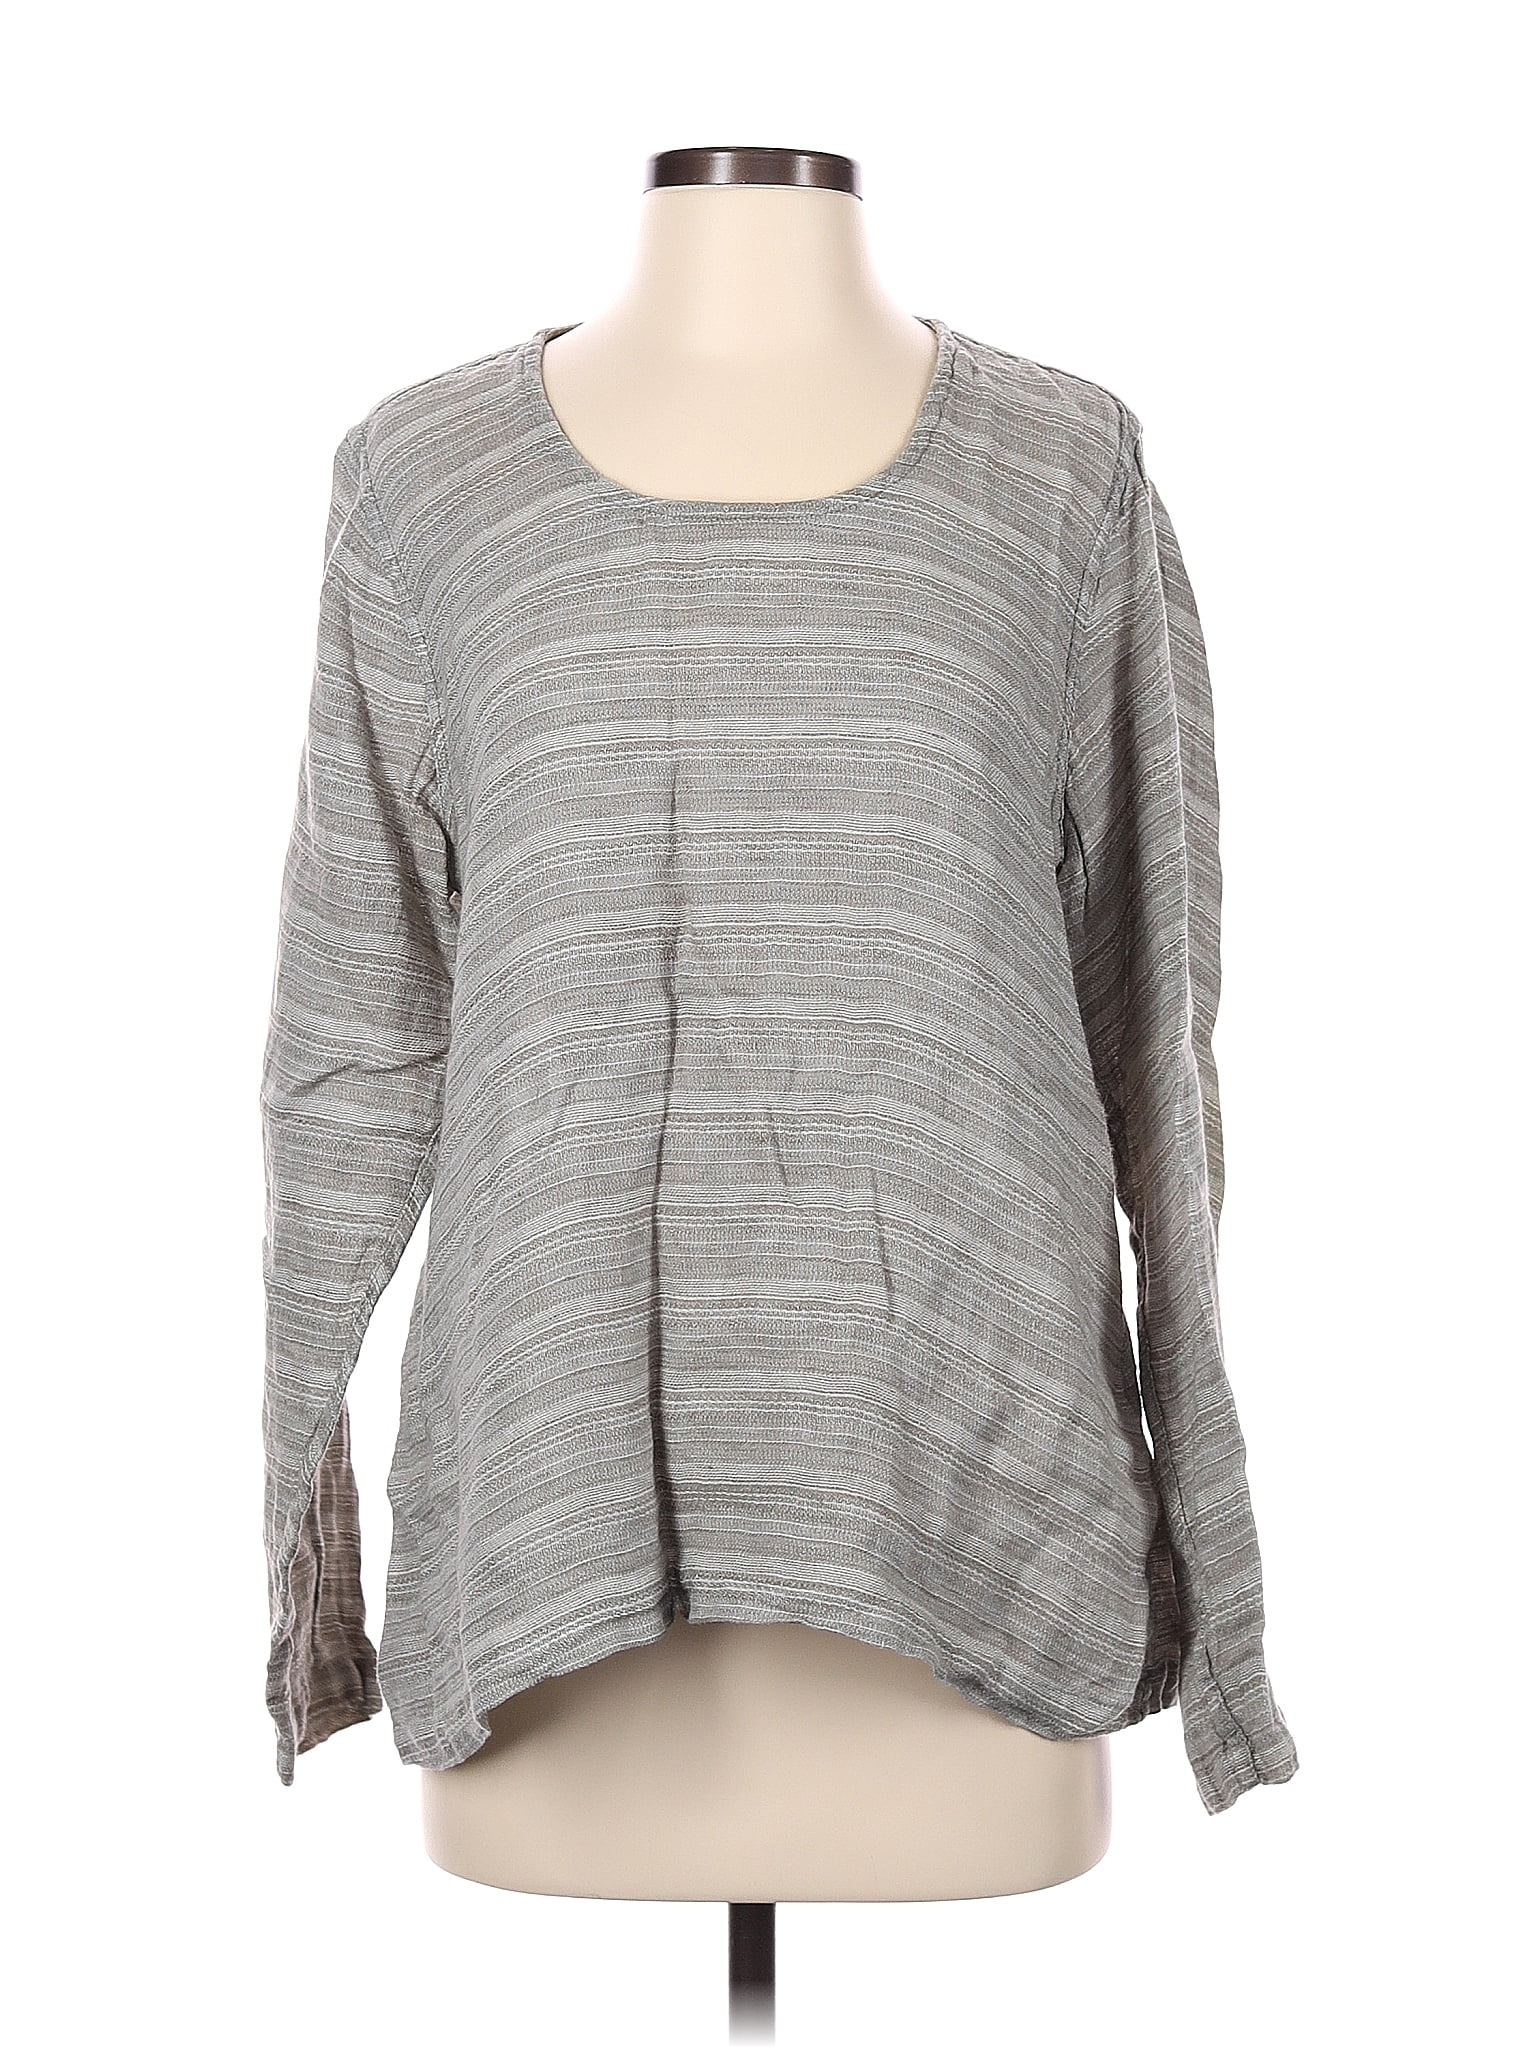 Flax 100% Linen Color Block Stripes Gray Long Sleeve Blouse Size S - 68 ...